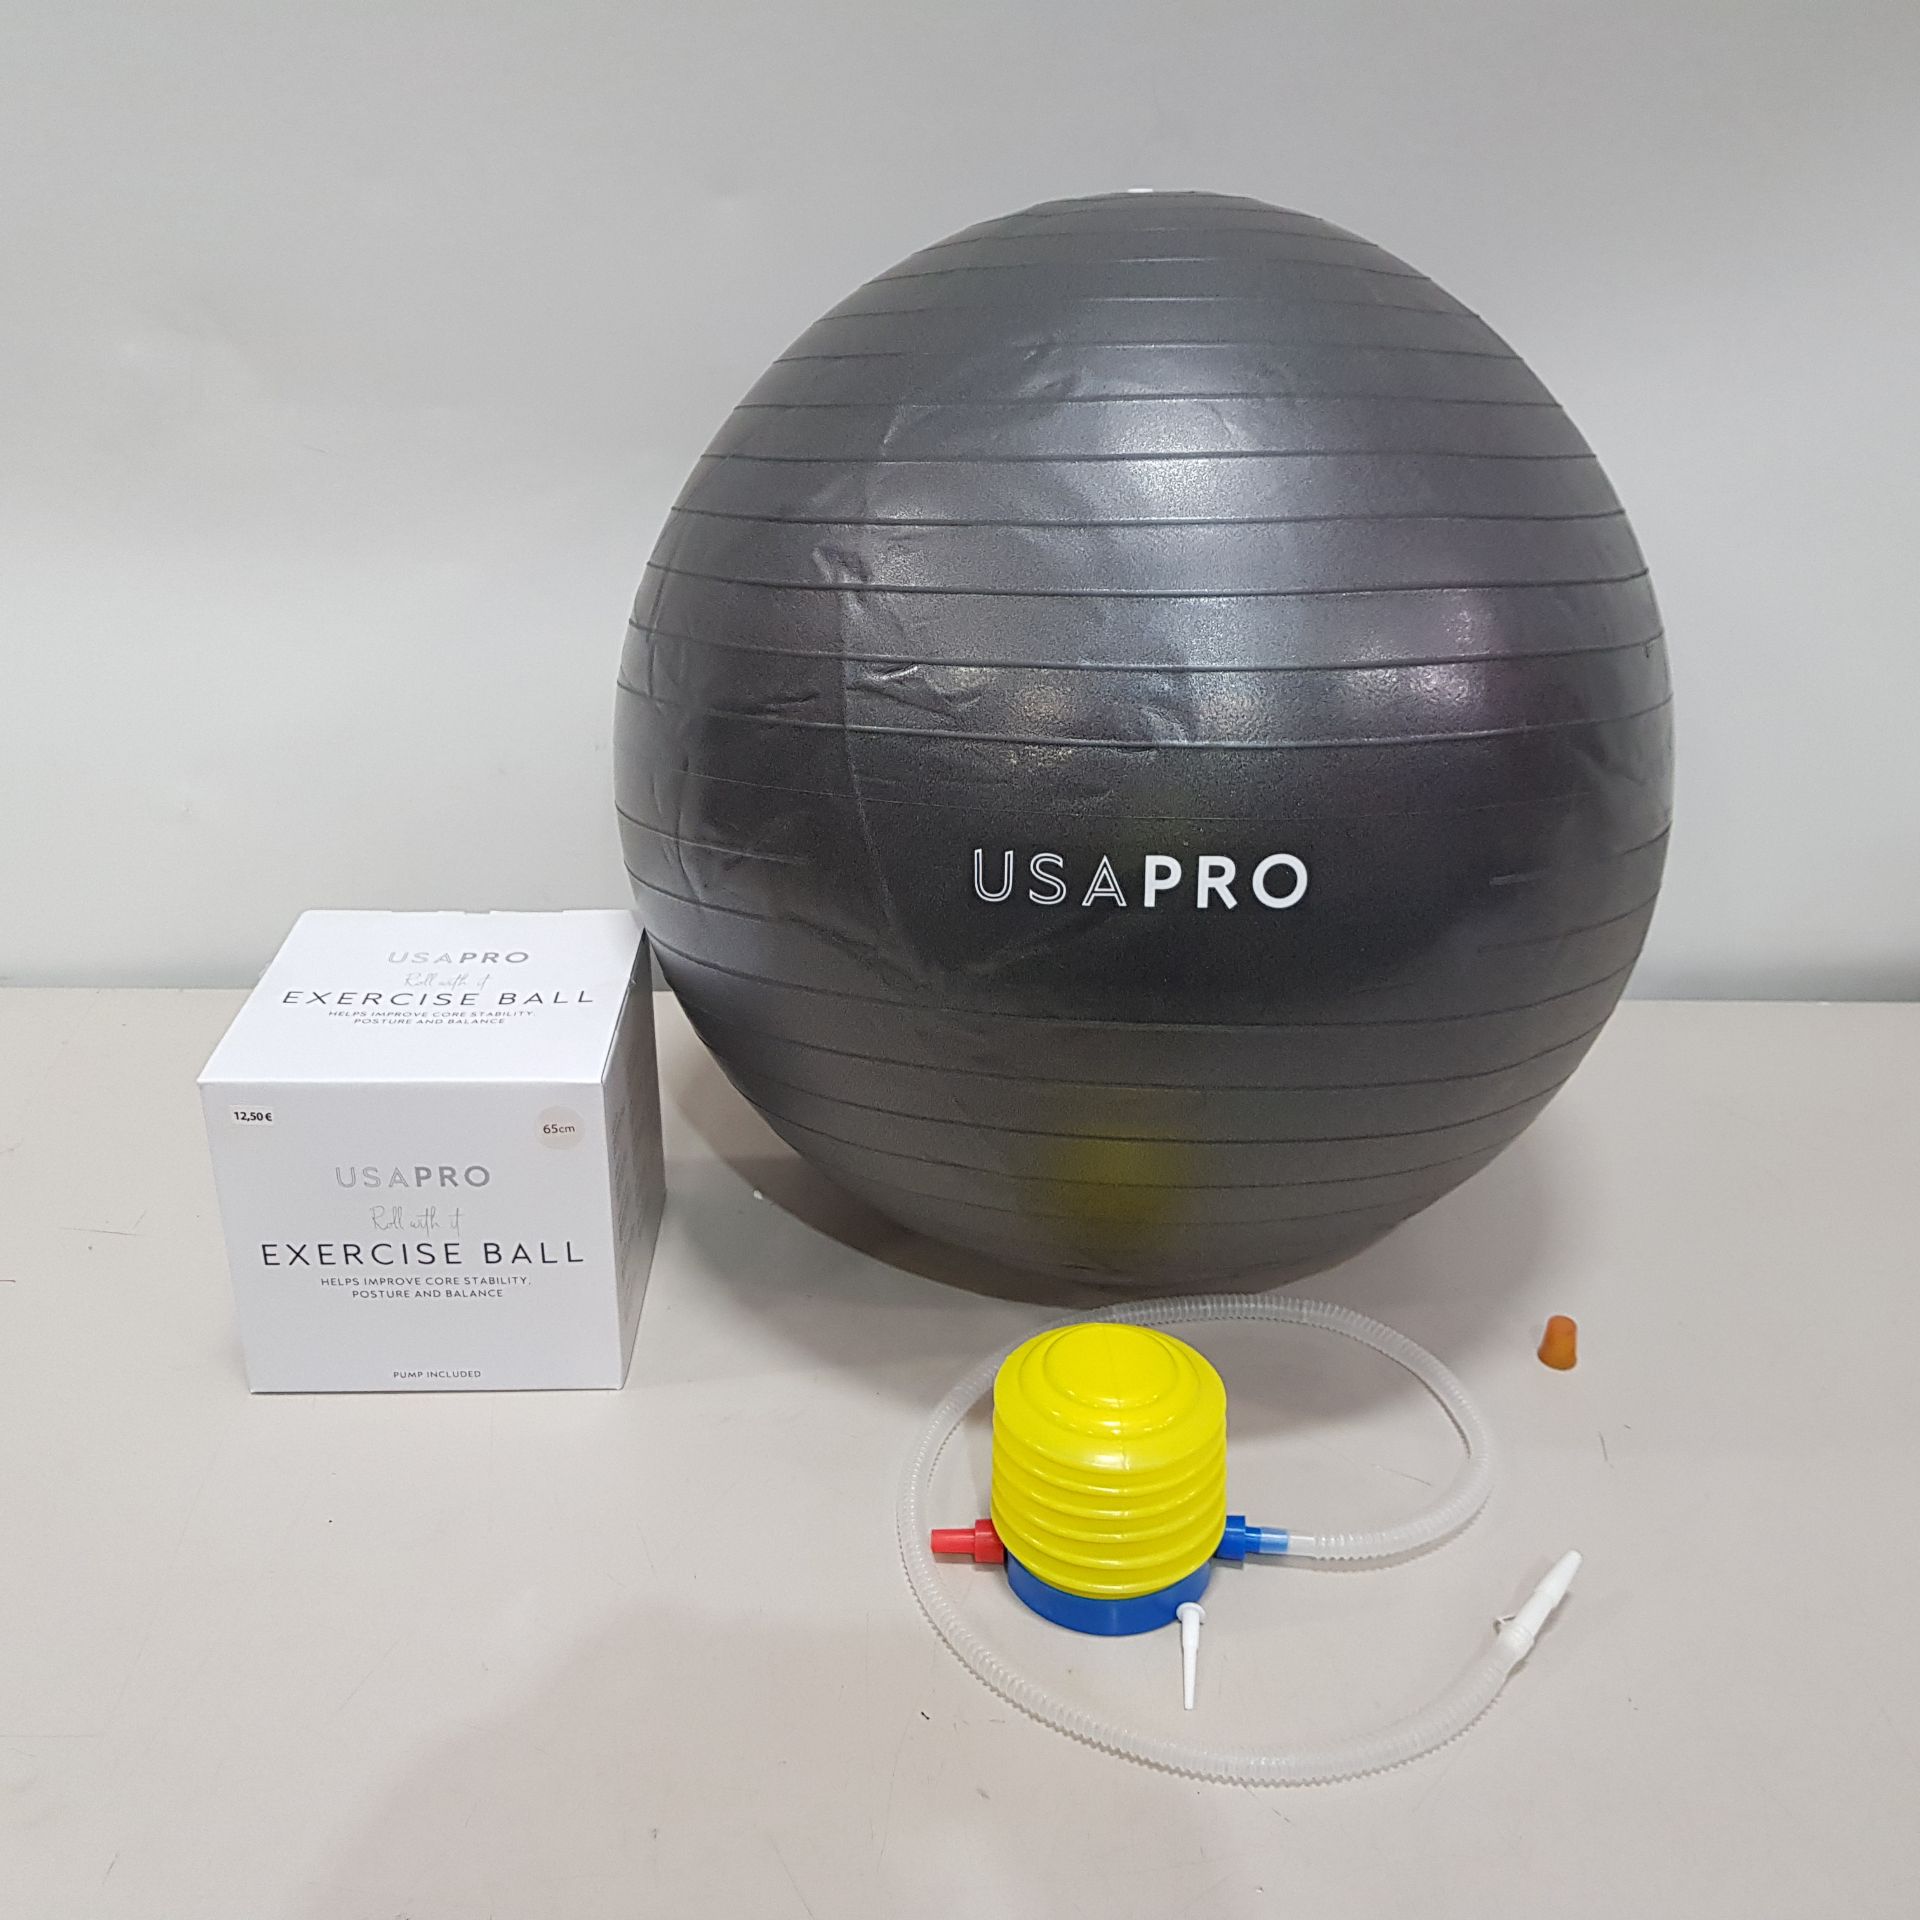 60 X BRAND NEW USA PRO EXERCISE BALL - INCLUDES PUMP - ALL IN SIZE 65 CM - RRP £ 15.99 EACH - IN 5